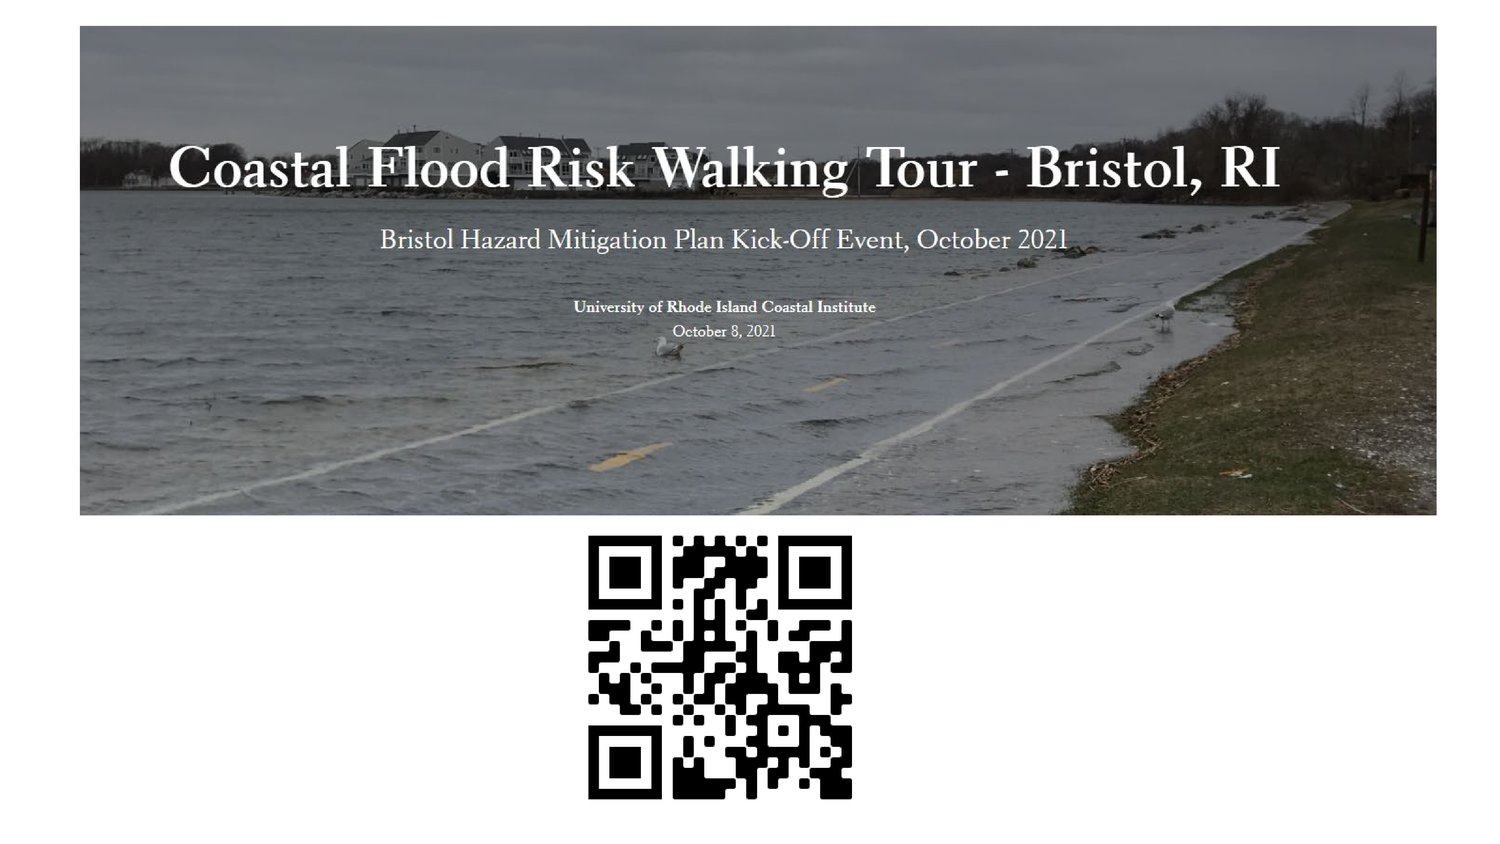 Use this QR code to follow your own tour of the vulnerable coastal areas of Bristol.